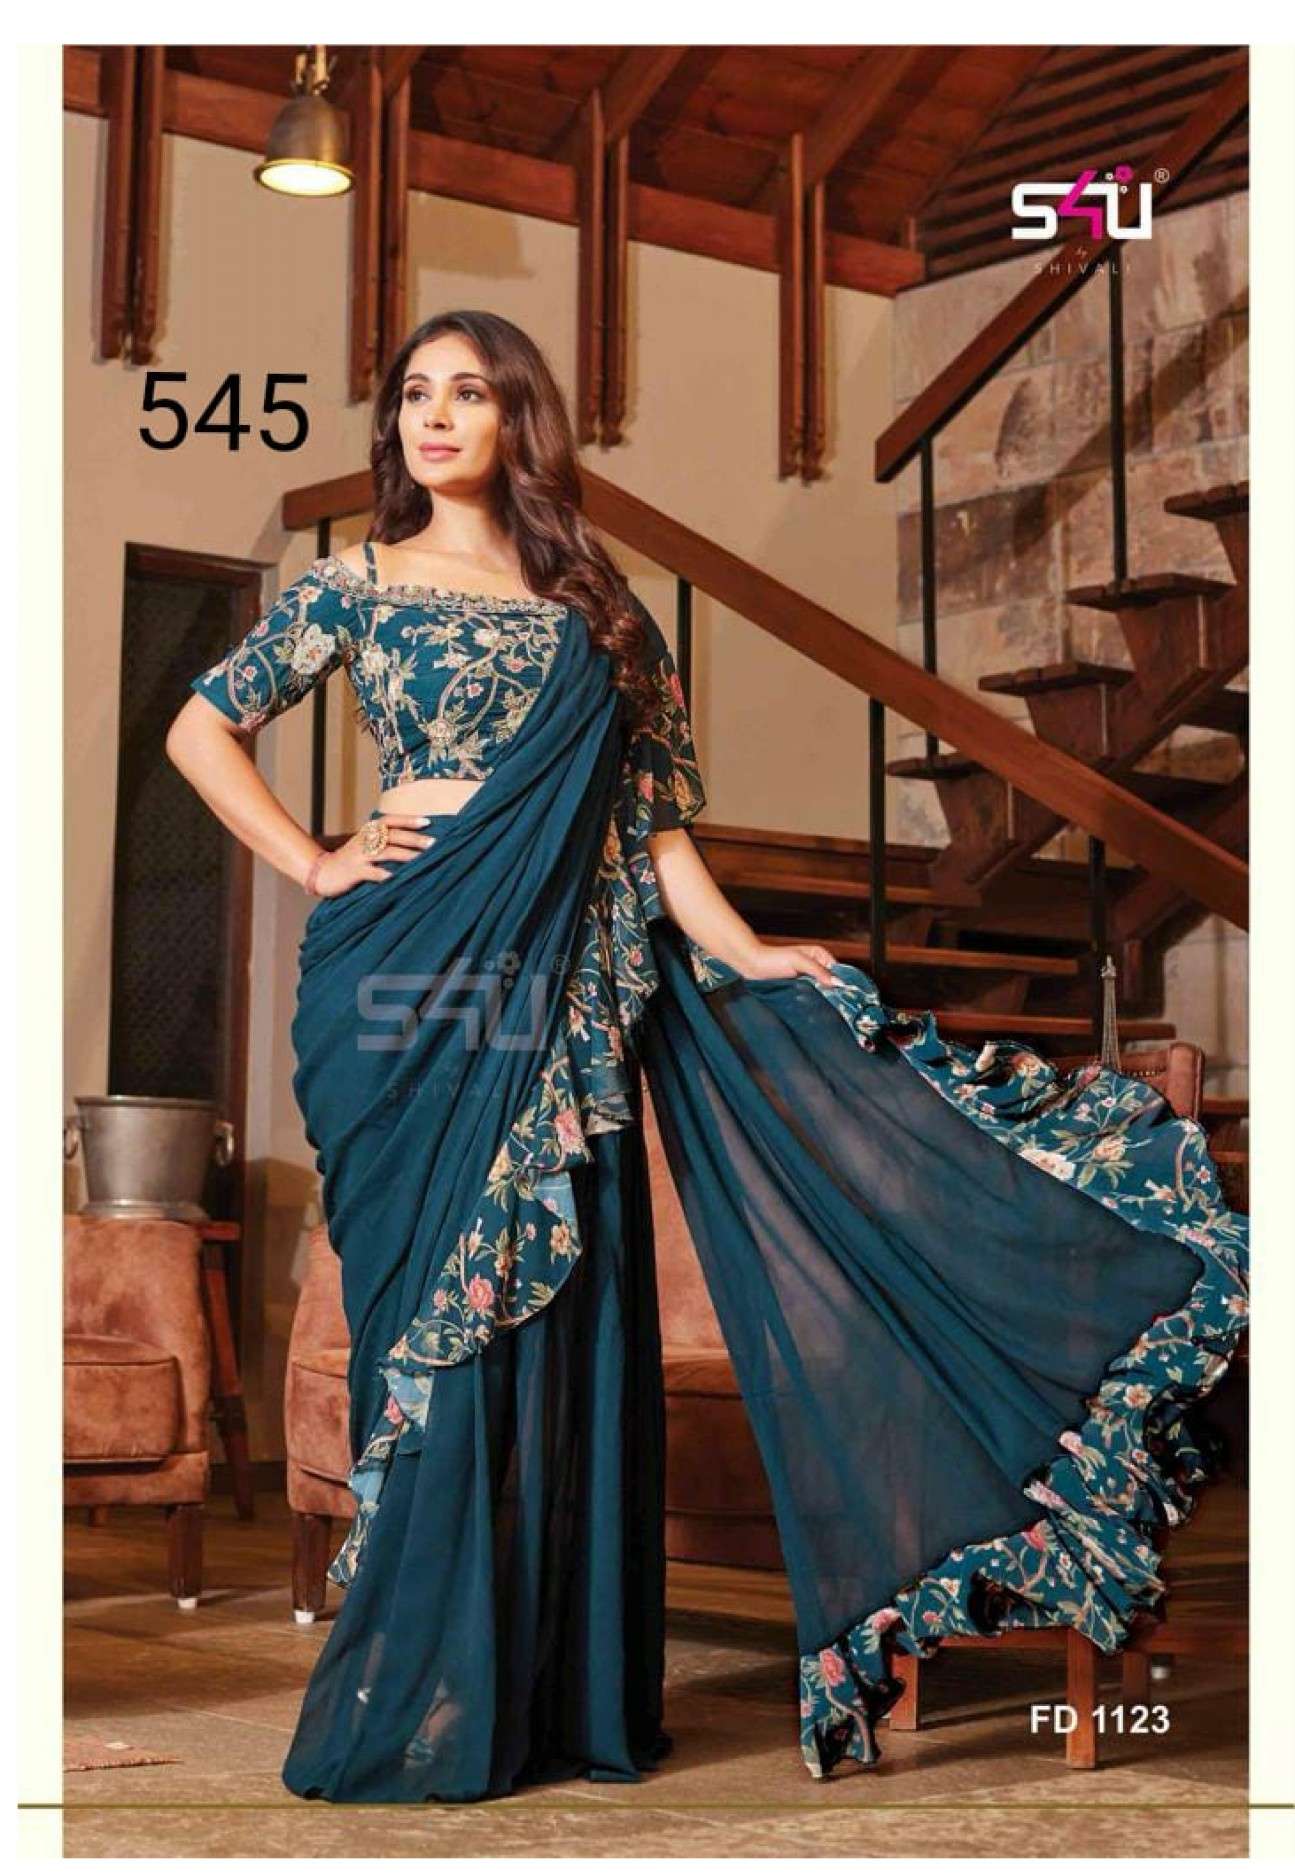 S4U 545 LATEST PRE STITCHED SAREE BY S4U AWESOME COLLECTION